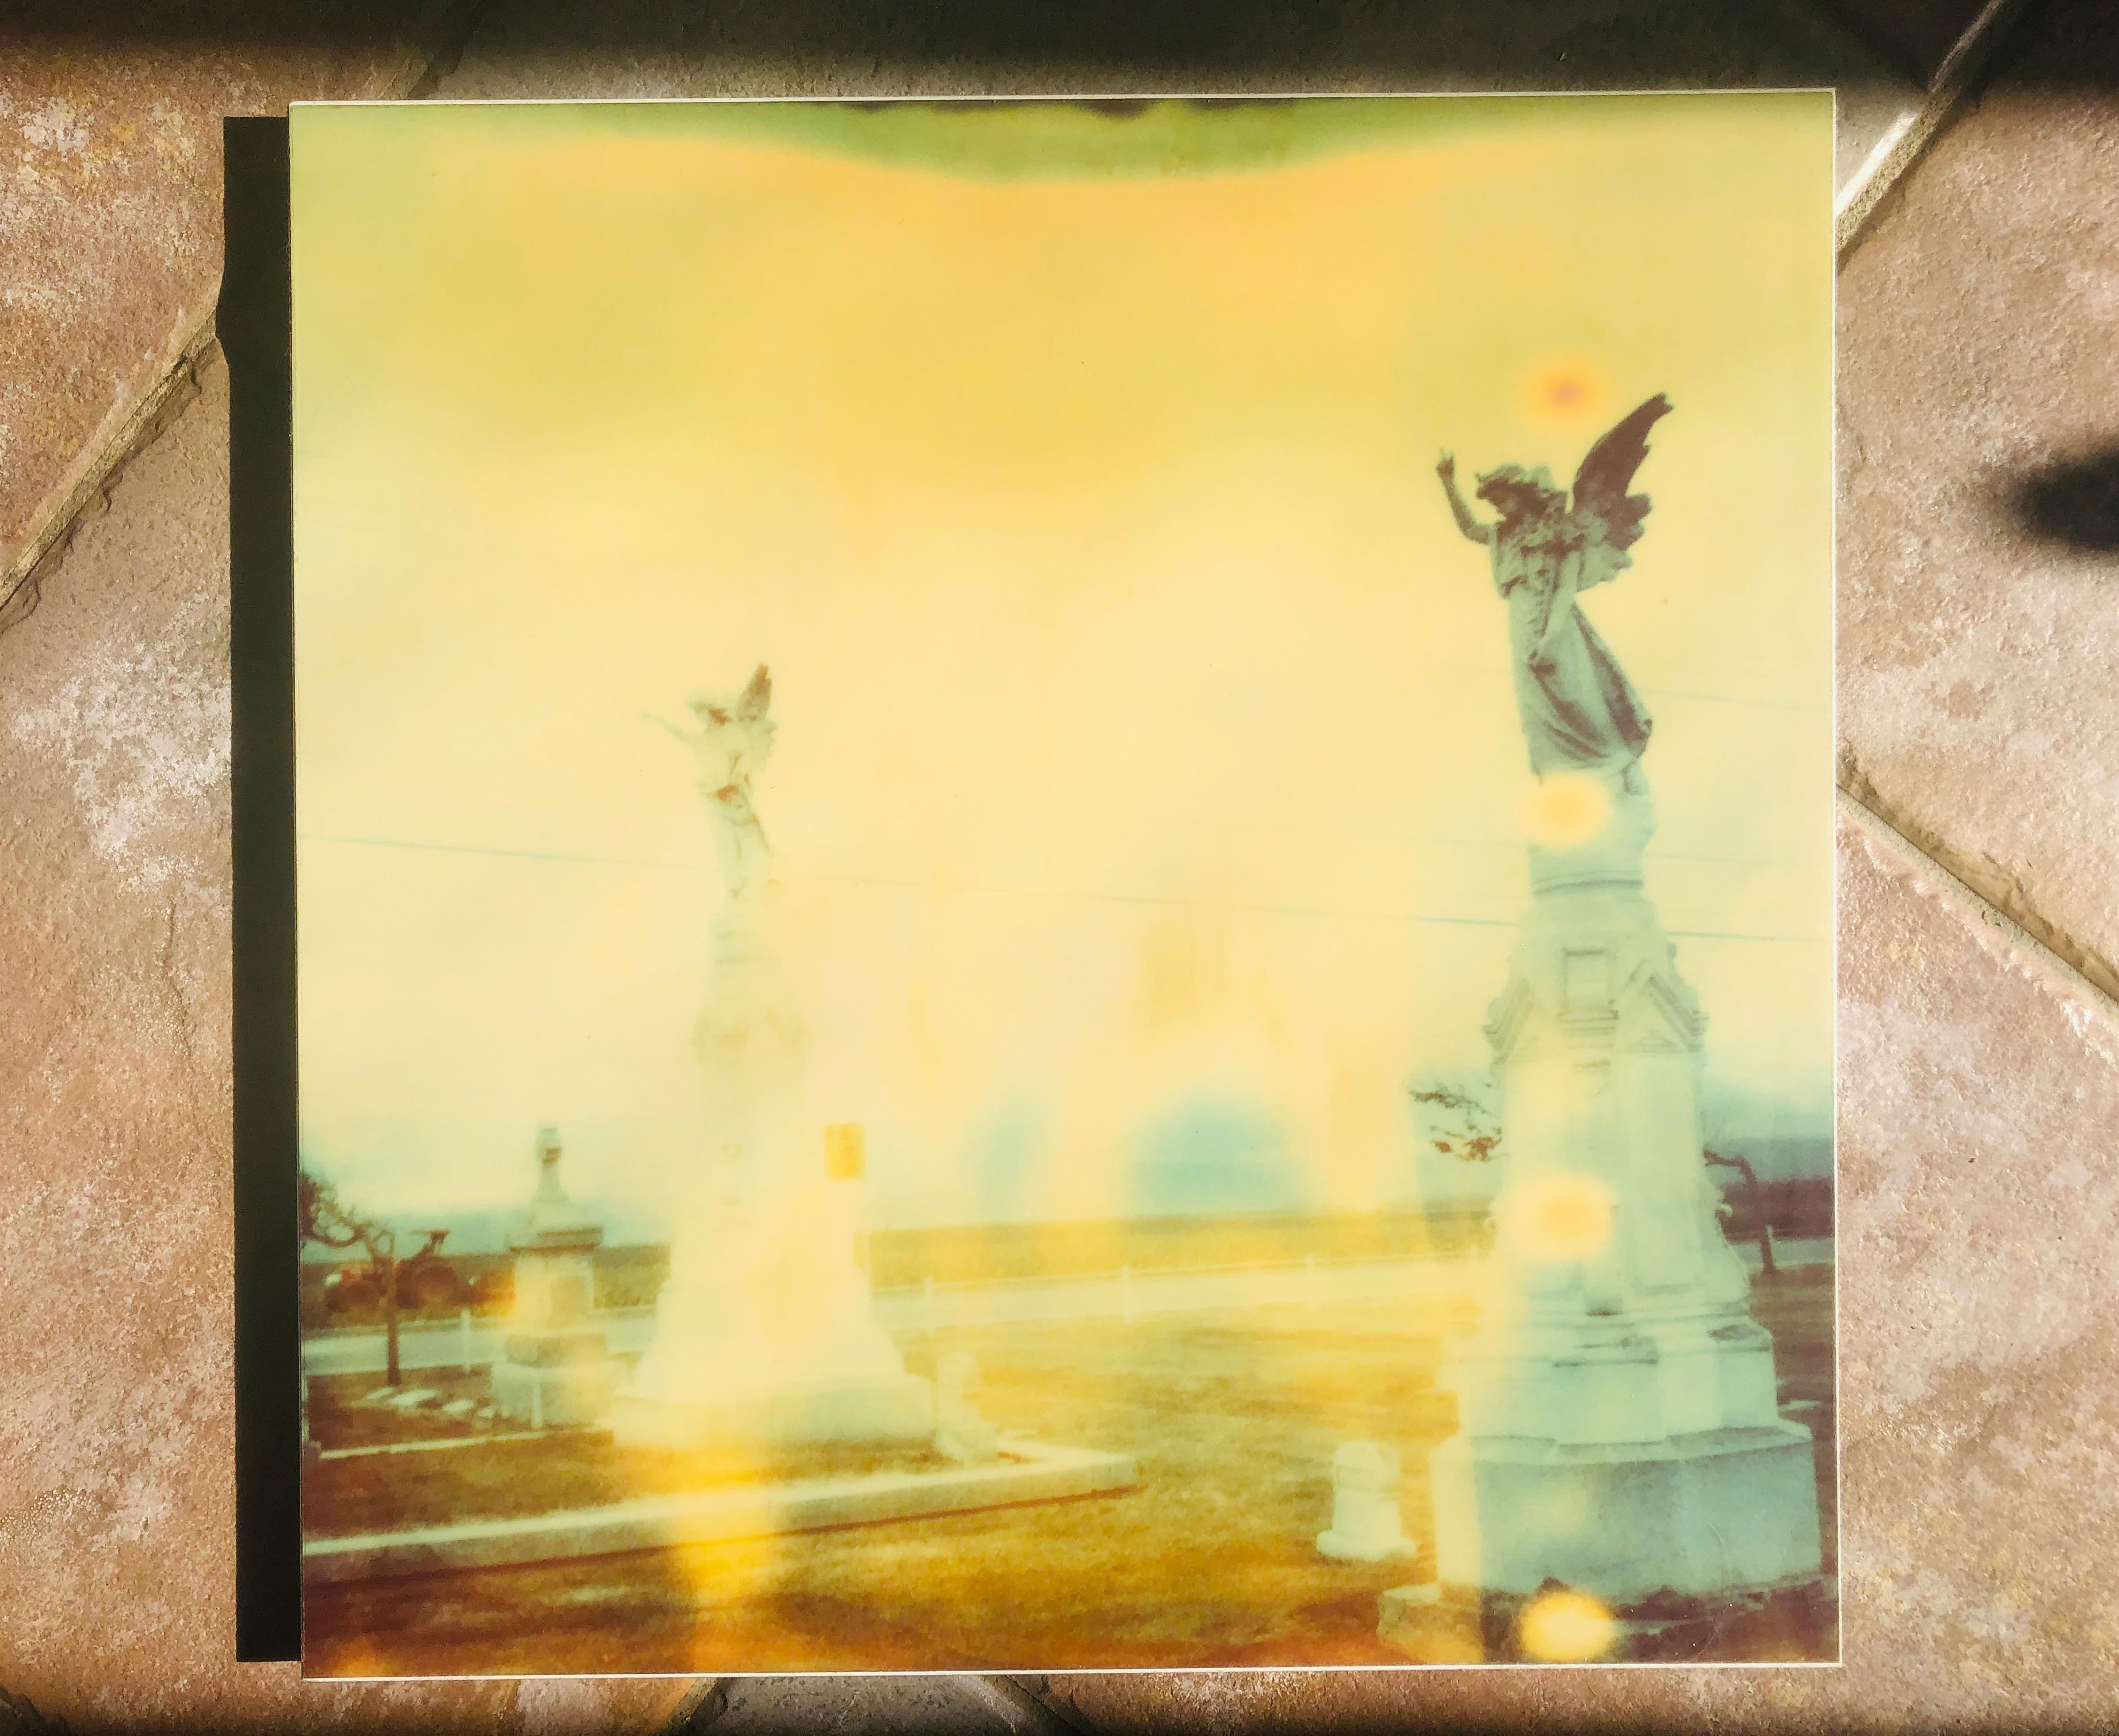 Guadalupe (The Last Picture Show) - mounted, analog, Polaroid, Contemporary - Photograph by Stefanie Schneider